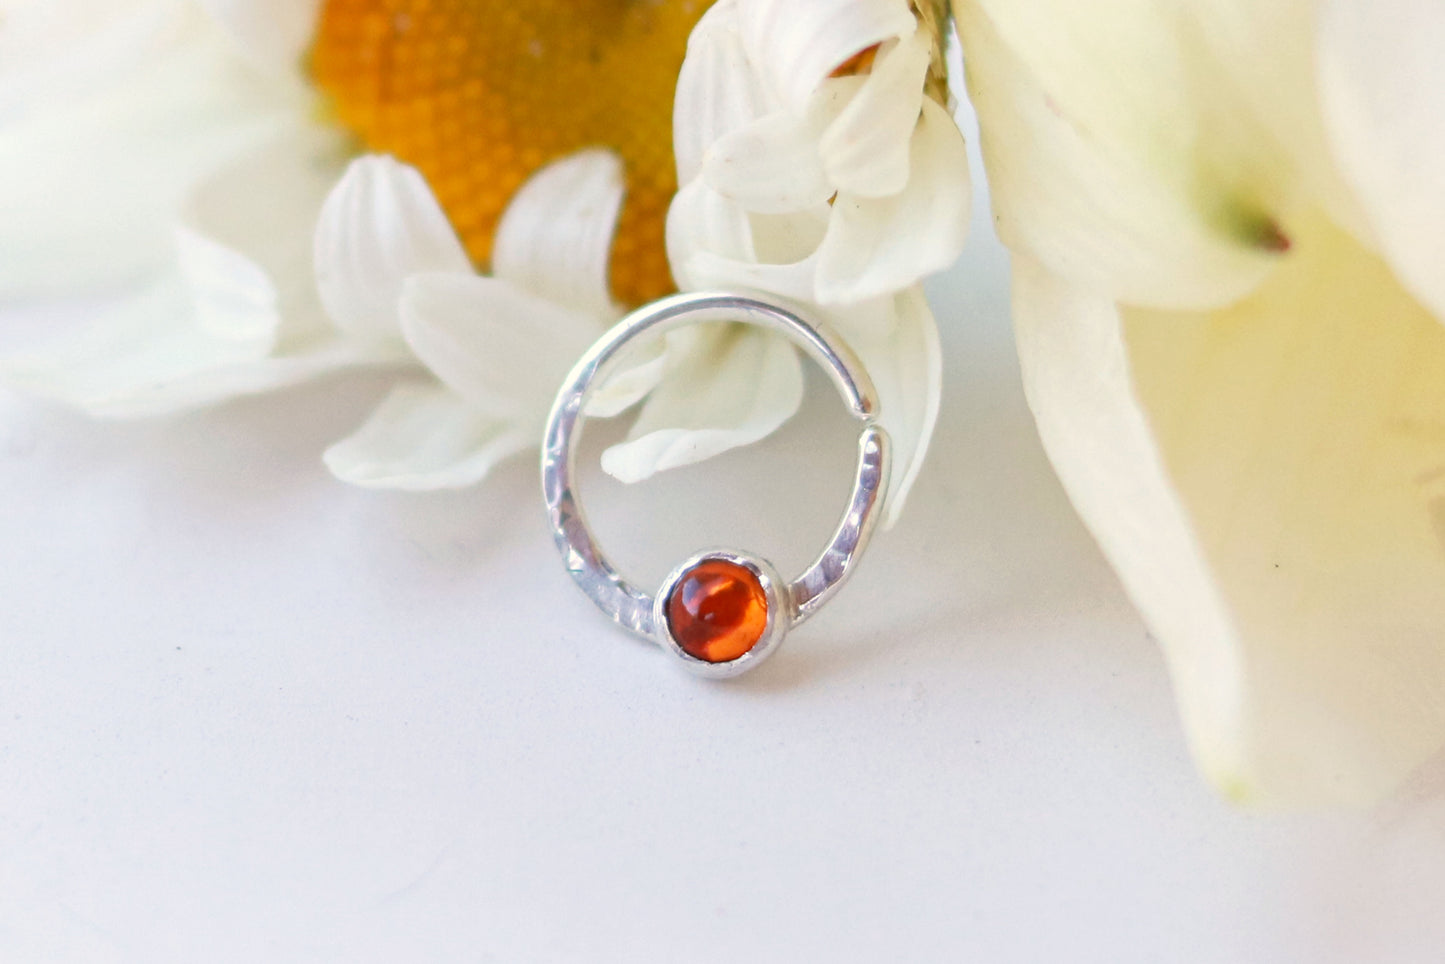 A sterling silver hoop, flattened and textured at the bottom, with an amber set in a bezel on top of the textured flat section.